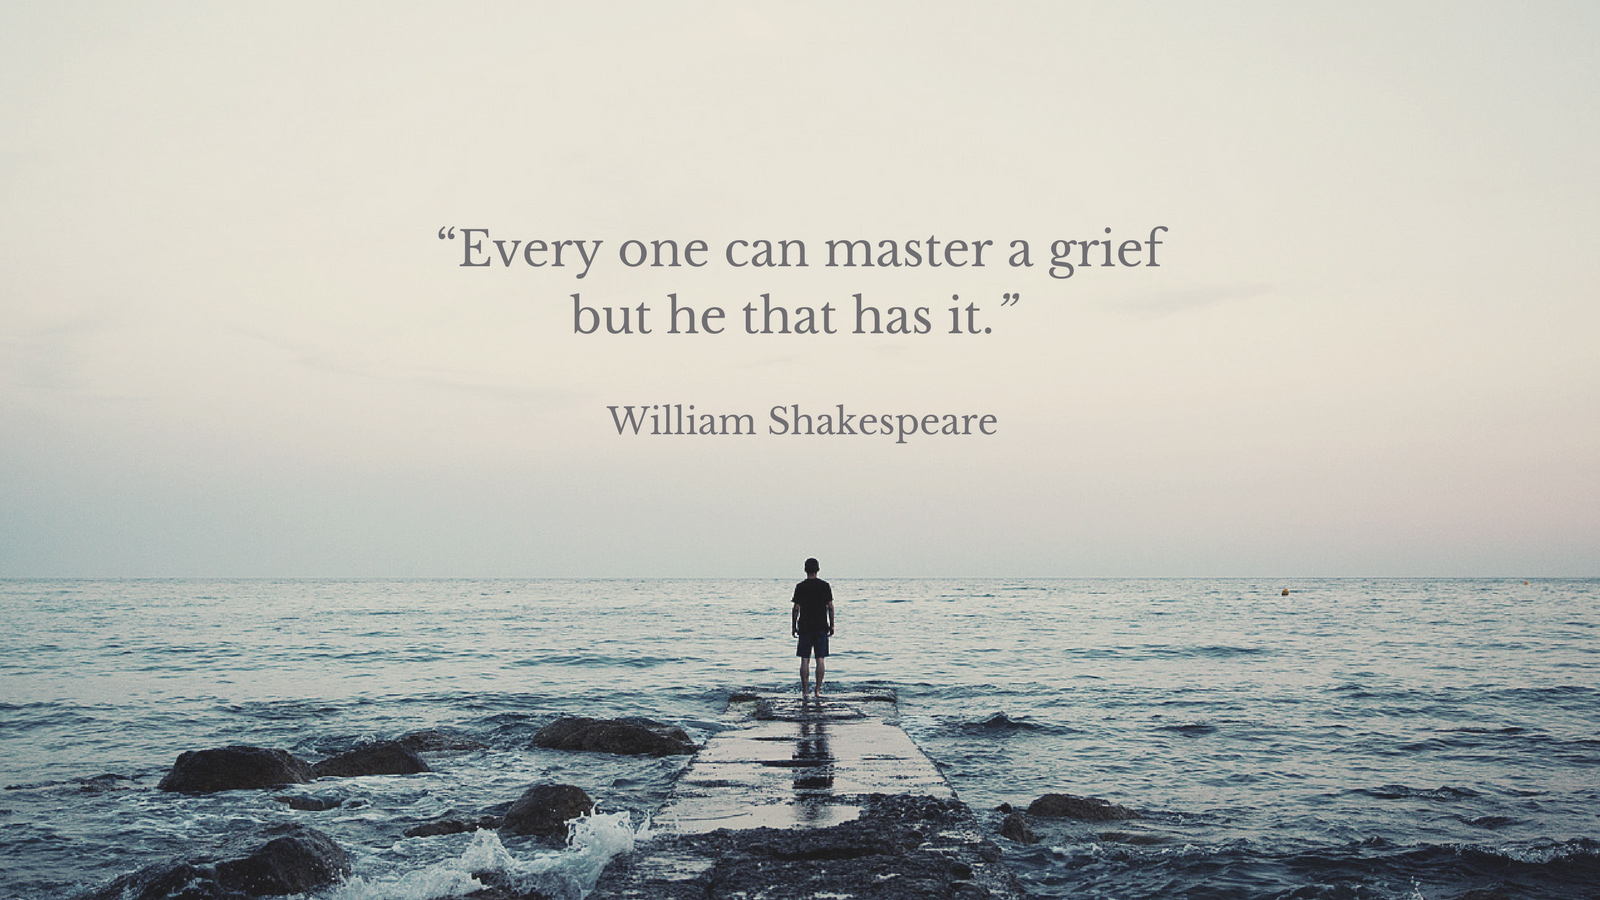 Photo of man standing at the end of a dock with quote above that reads: "Every one can master a grief but he that has it." William Shakespeare.